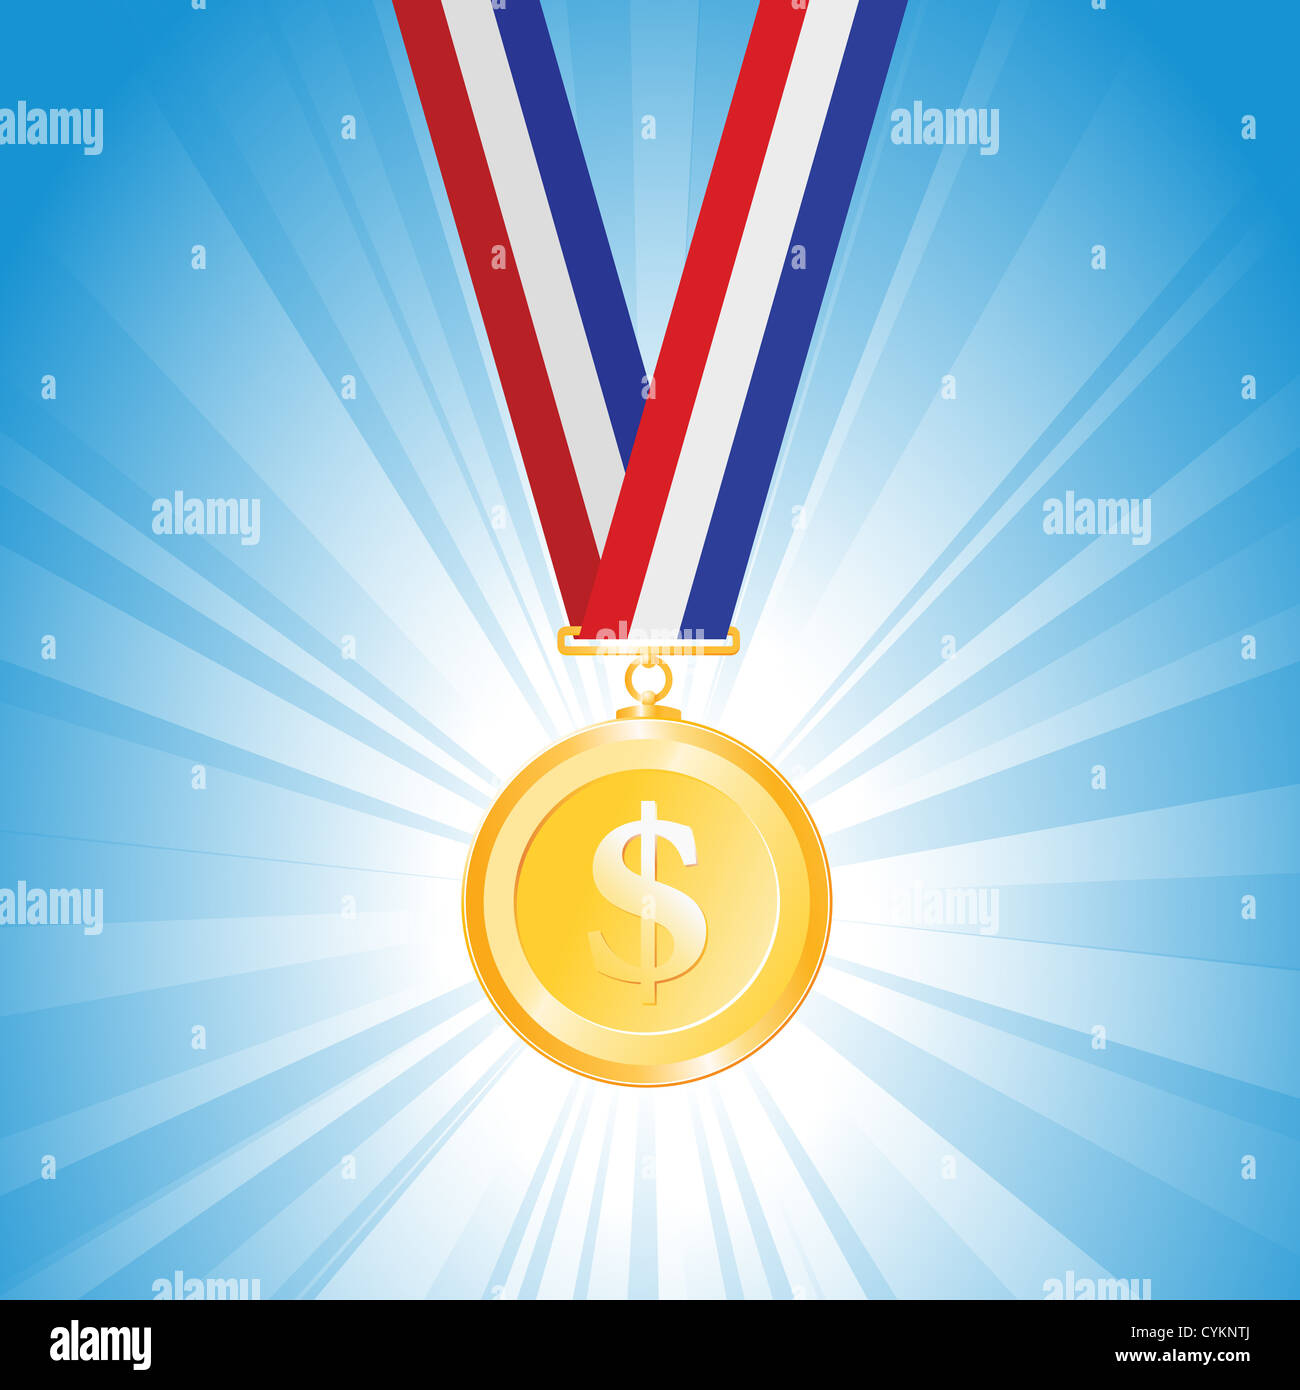 Vector illustration of a medal with golden dollar coin. Stock Photo